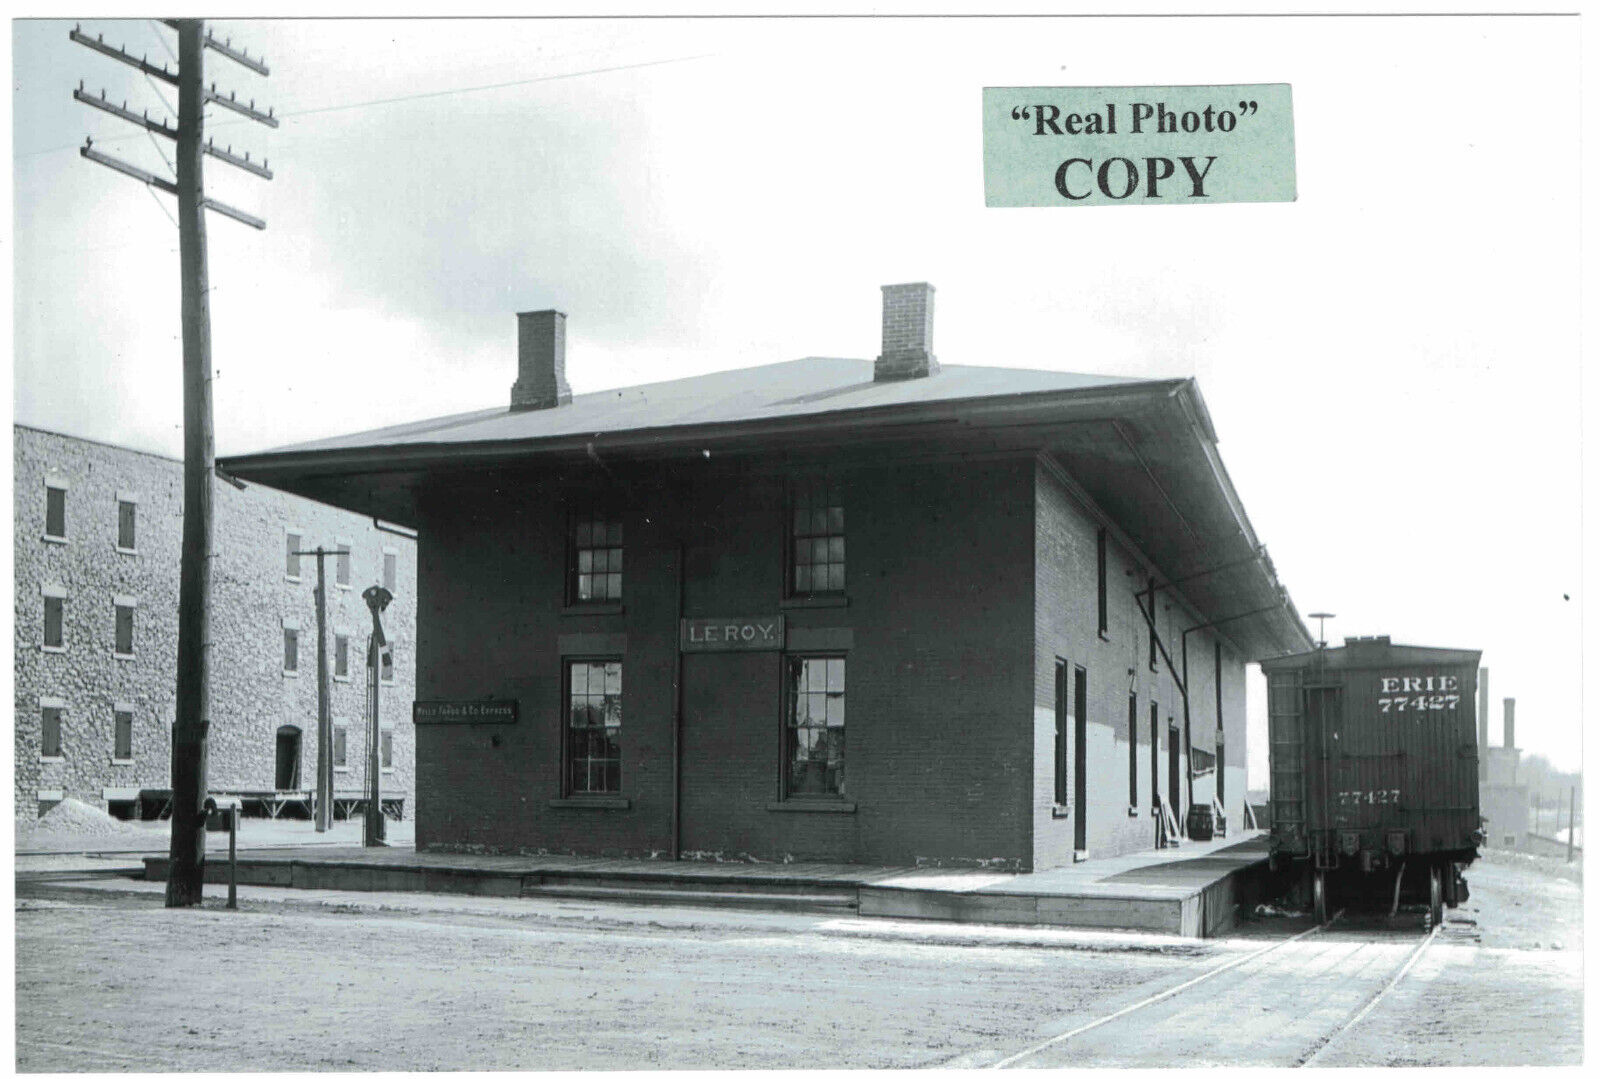 Erie Railroad (Attica Branch)  Depot (train station) at LeRoy, Genesee Co., NY